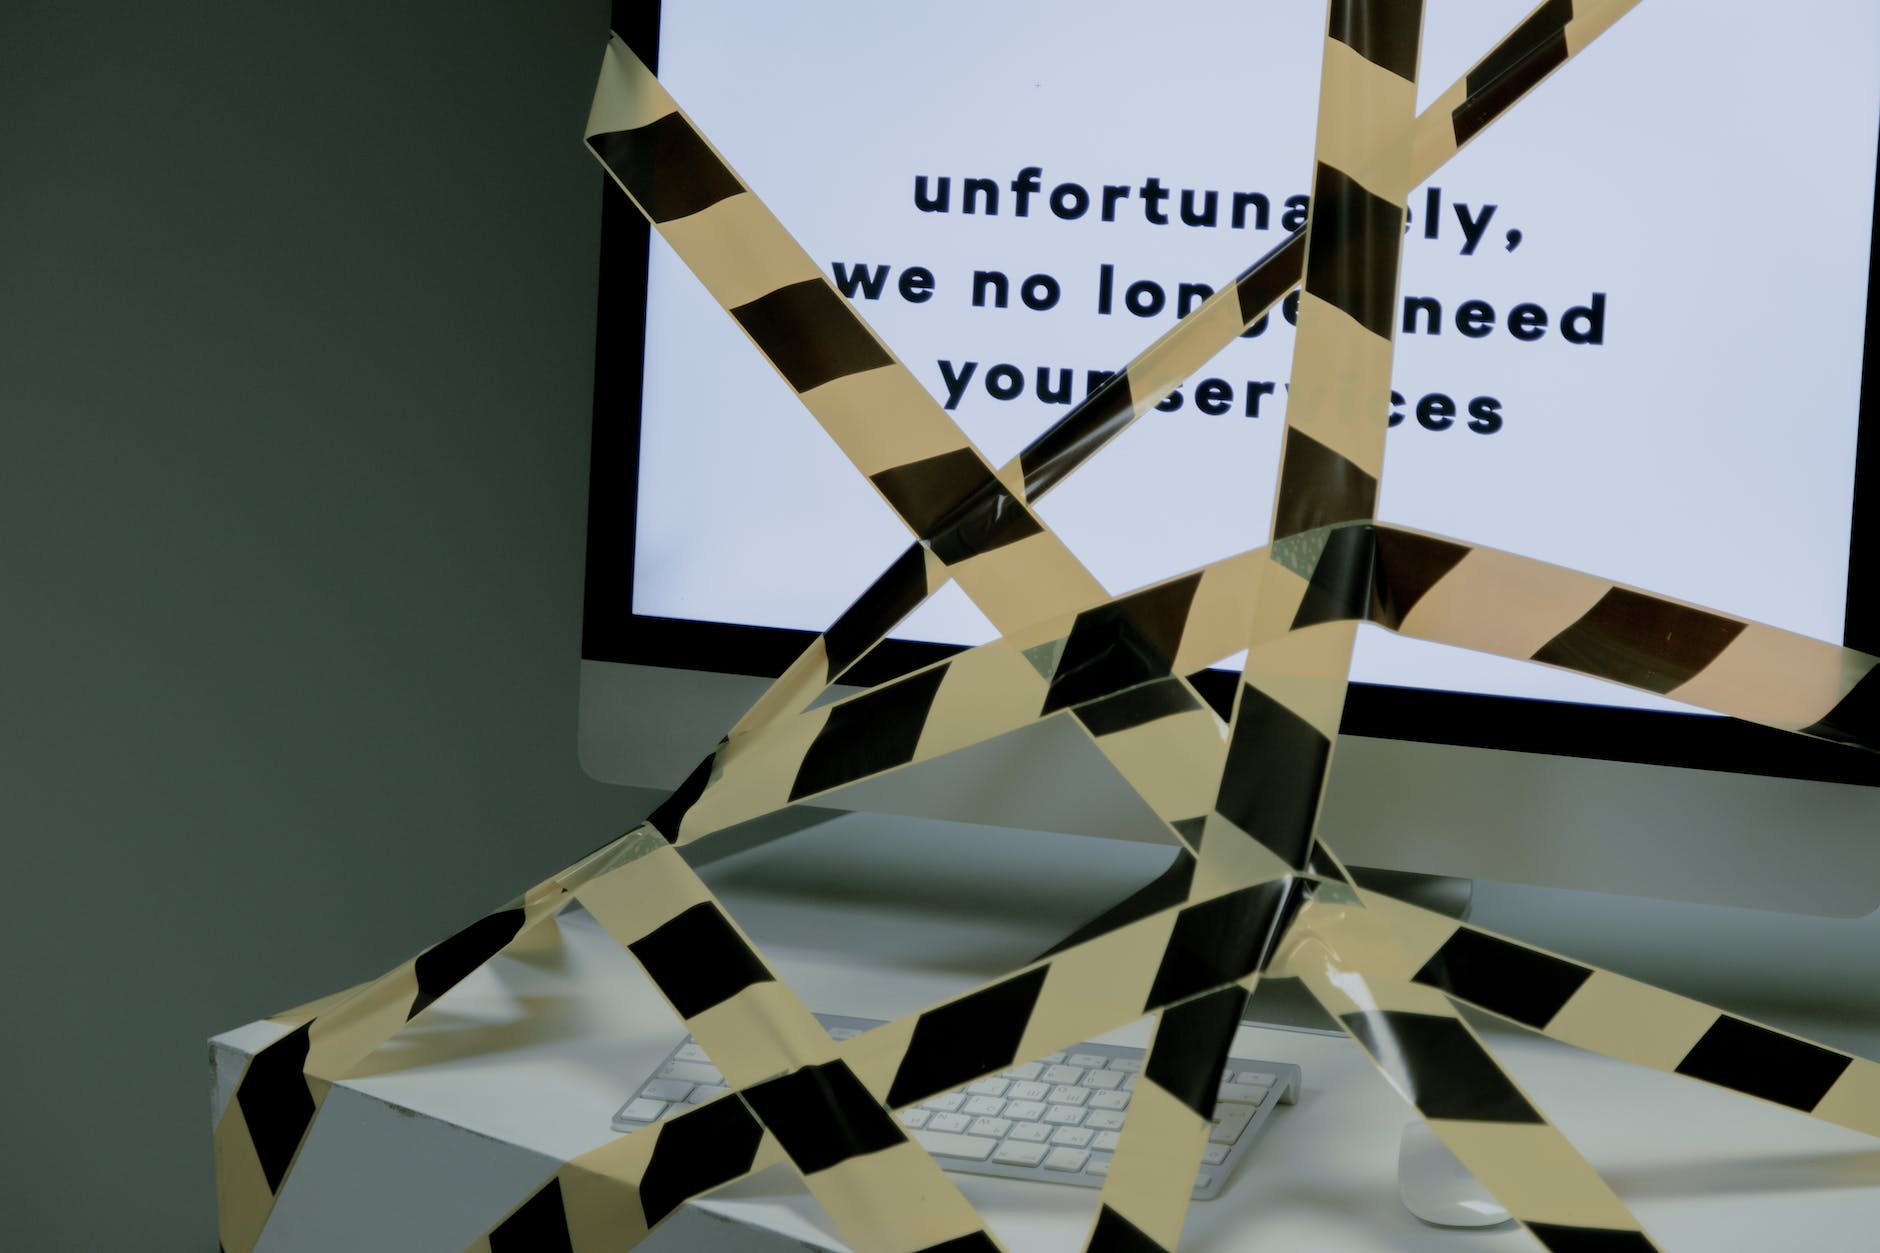 A computer screen displays the text' unfortunately, we no longer need your services'. The screen is on a white desk and the desk has been masked off with black and hells striped hazard tape to stop people using the keyboard on the desk